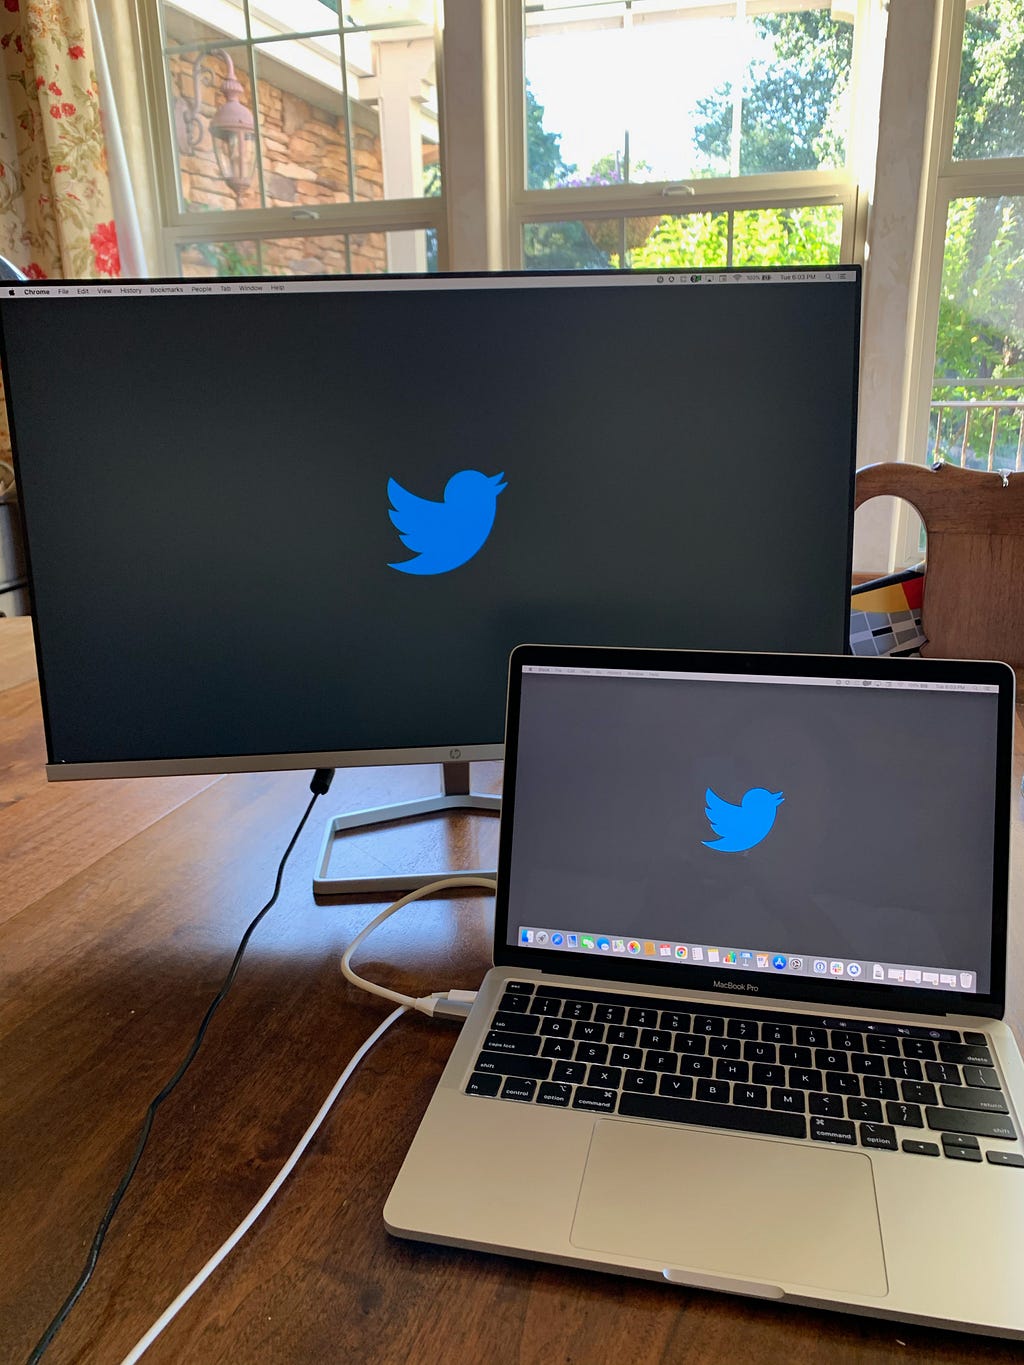 Picture of my office setup for the summer — a monitor and mac laptop with the twitter logo.